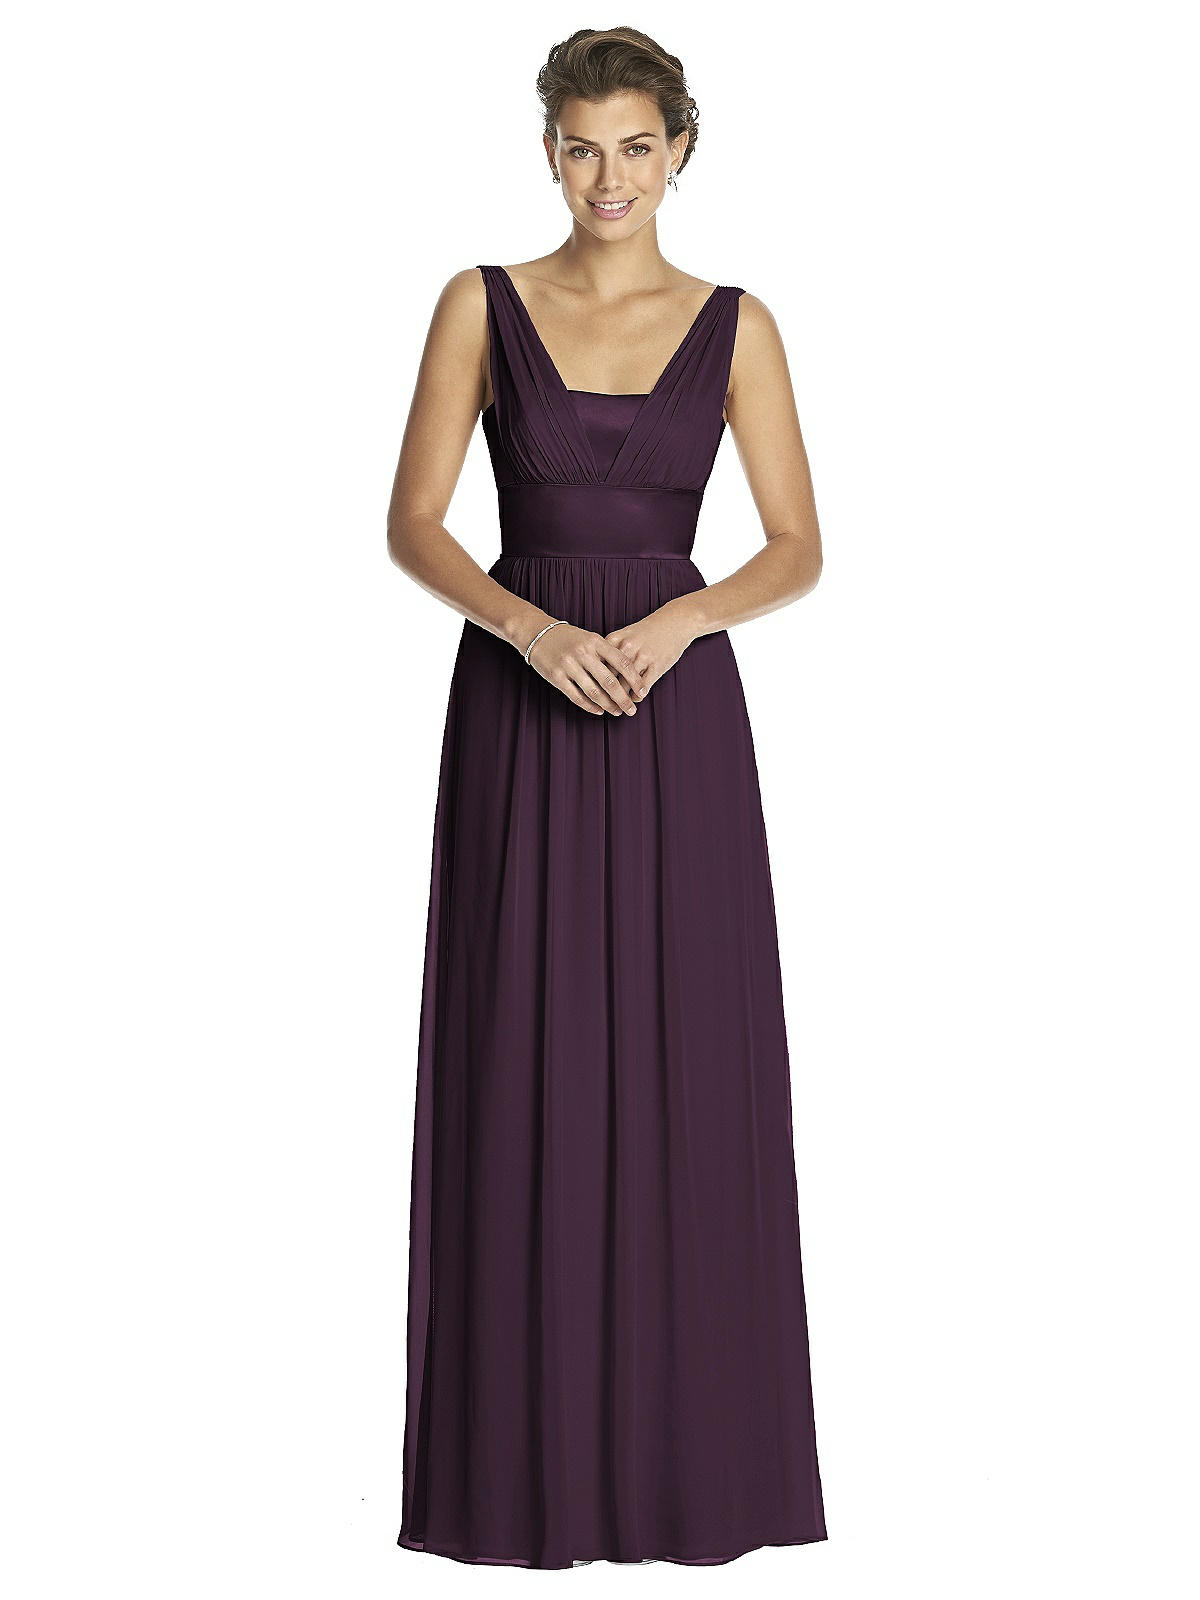 Dessy Collection Bridesmaid Dress Style 2890 The Dessy Group